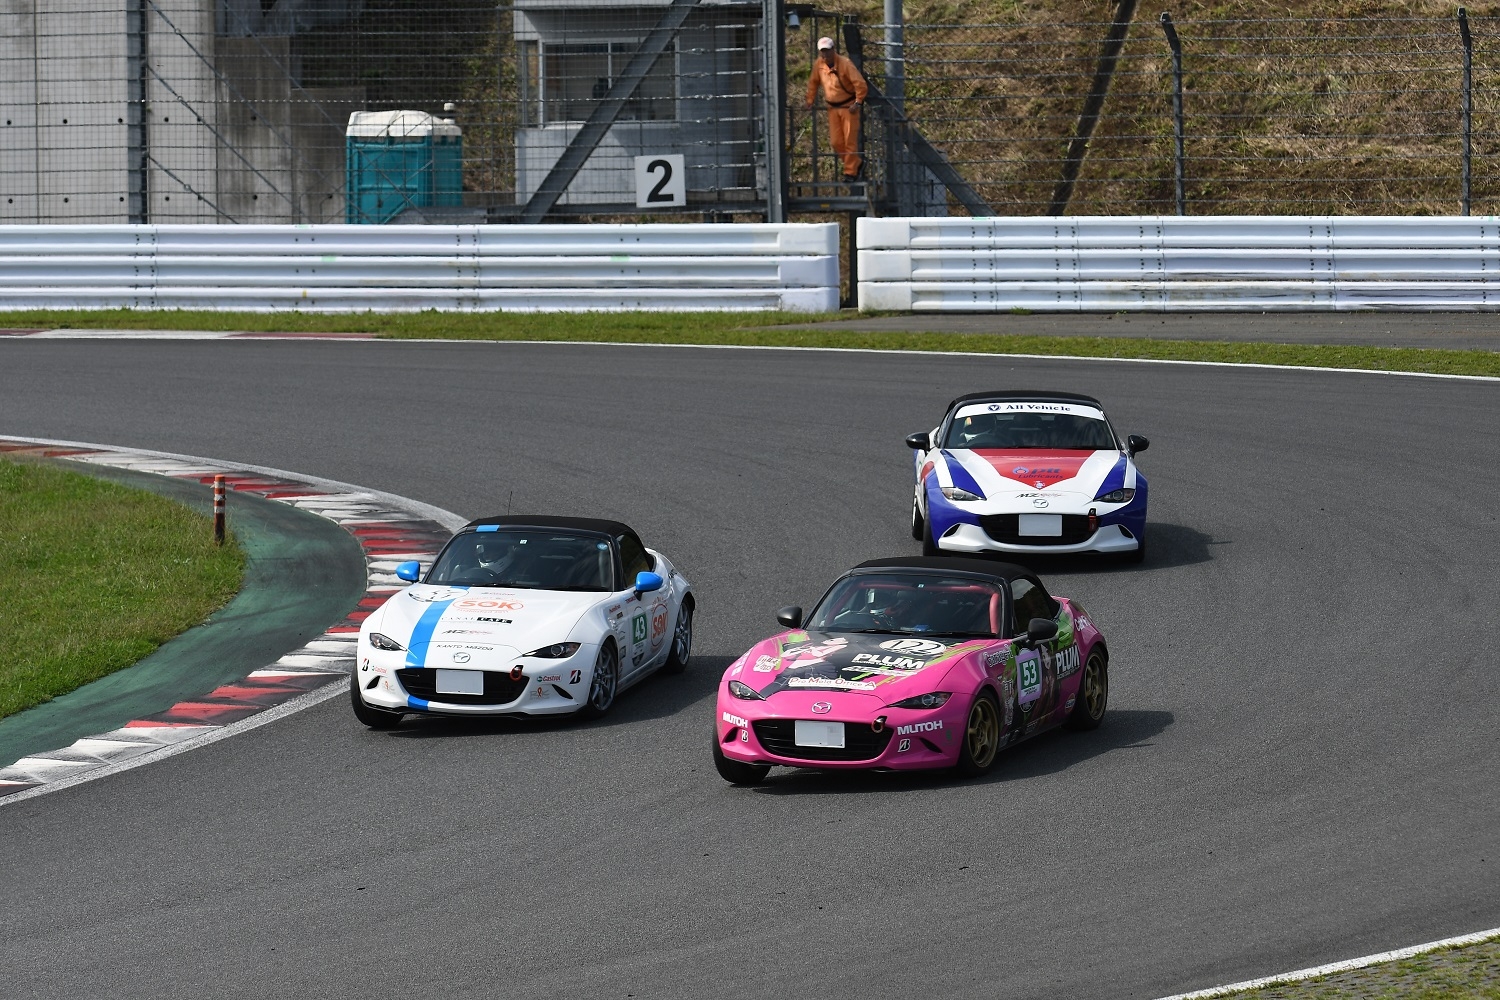 MAZDA PARTY RACE Ⅲ